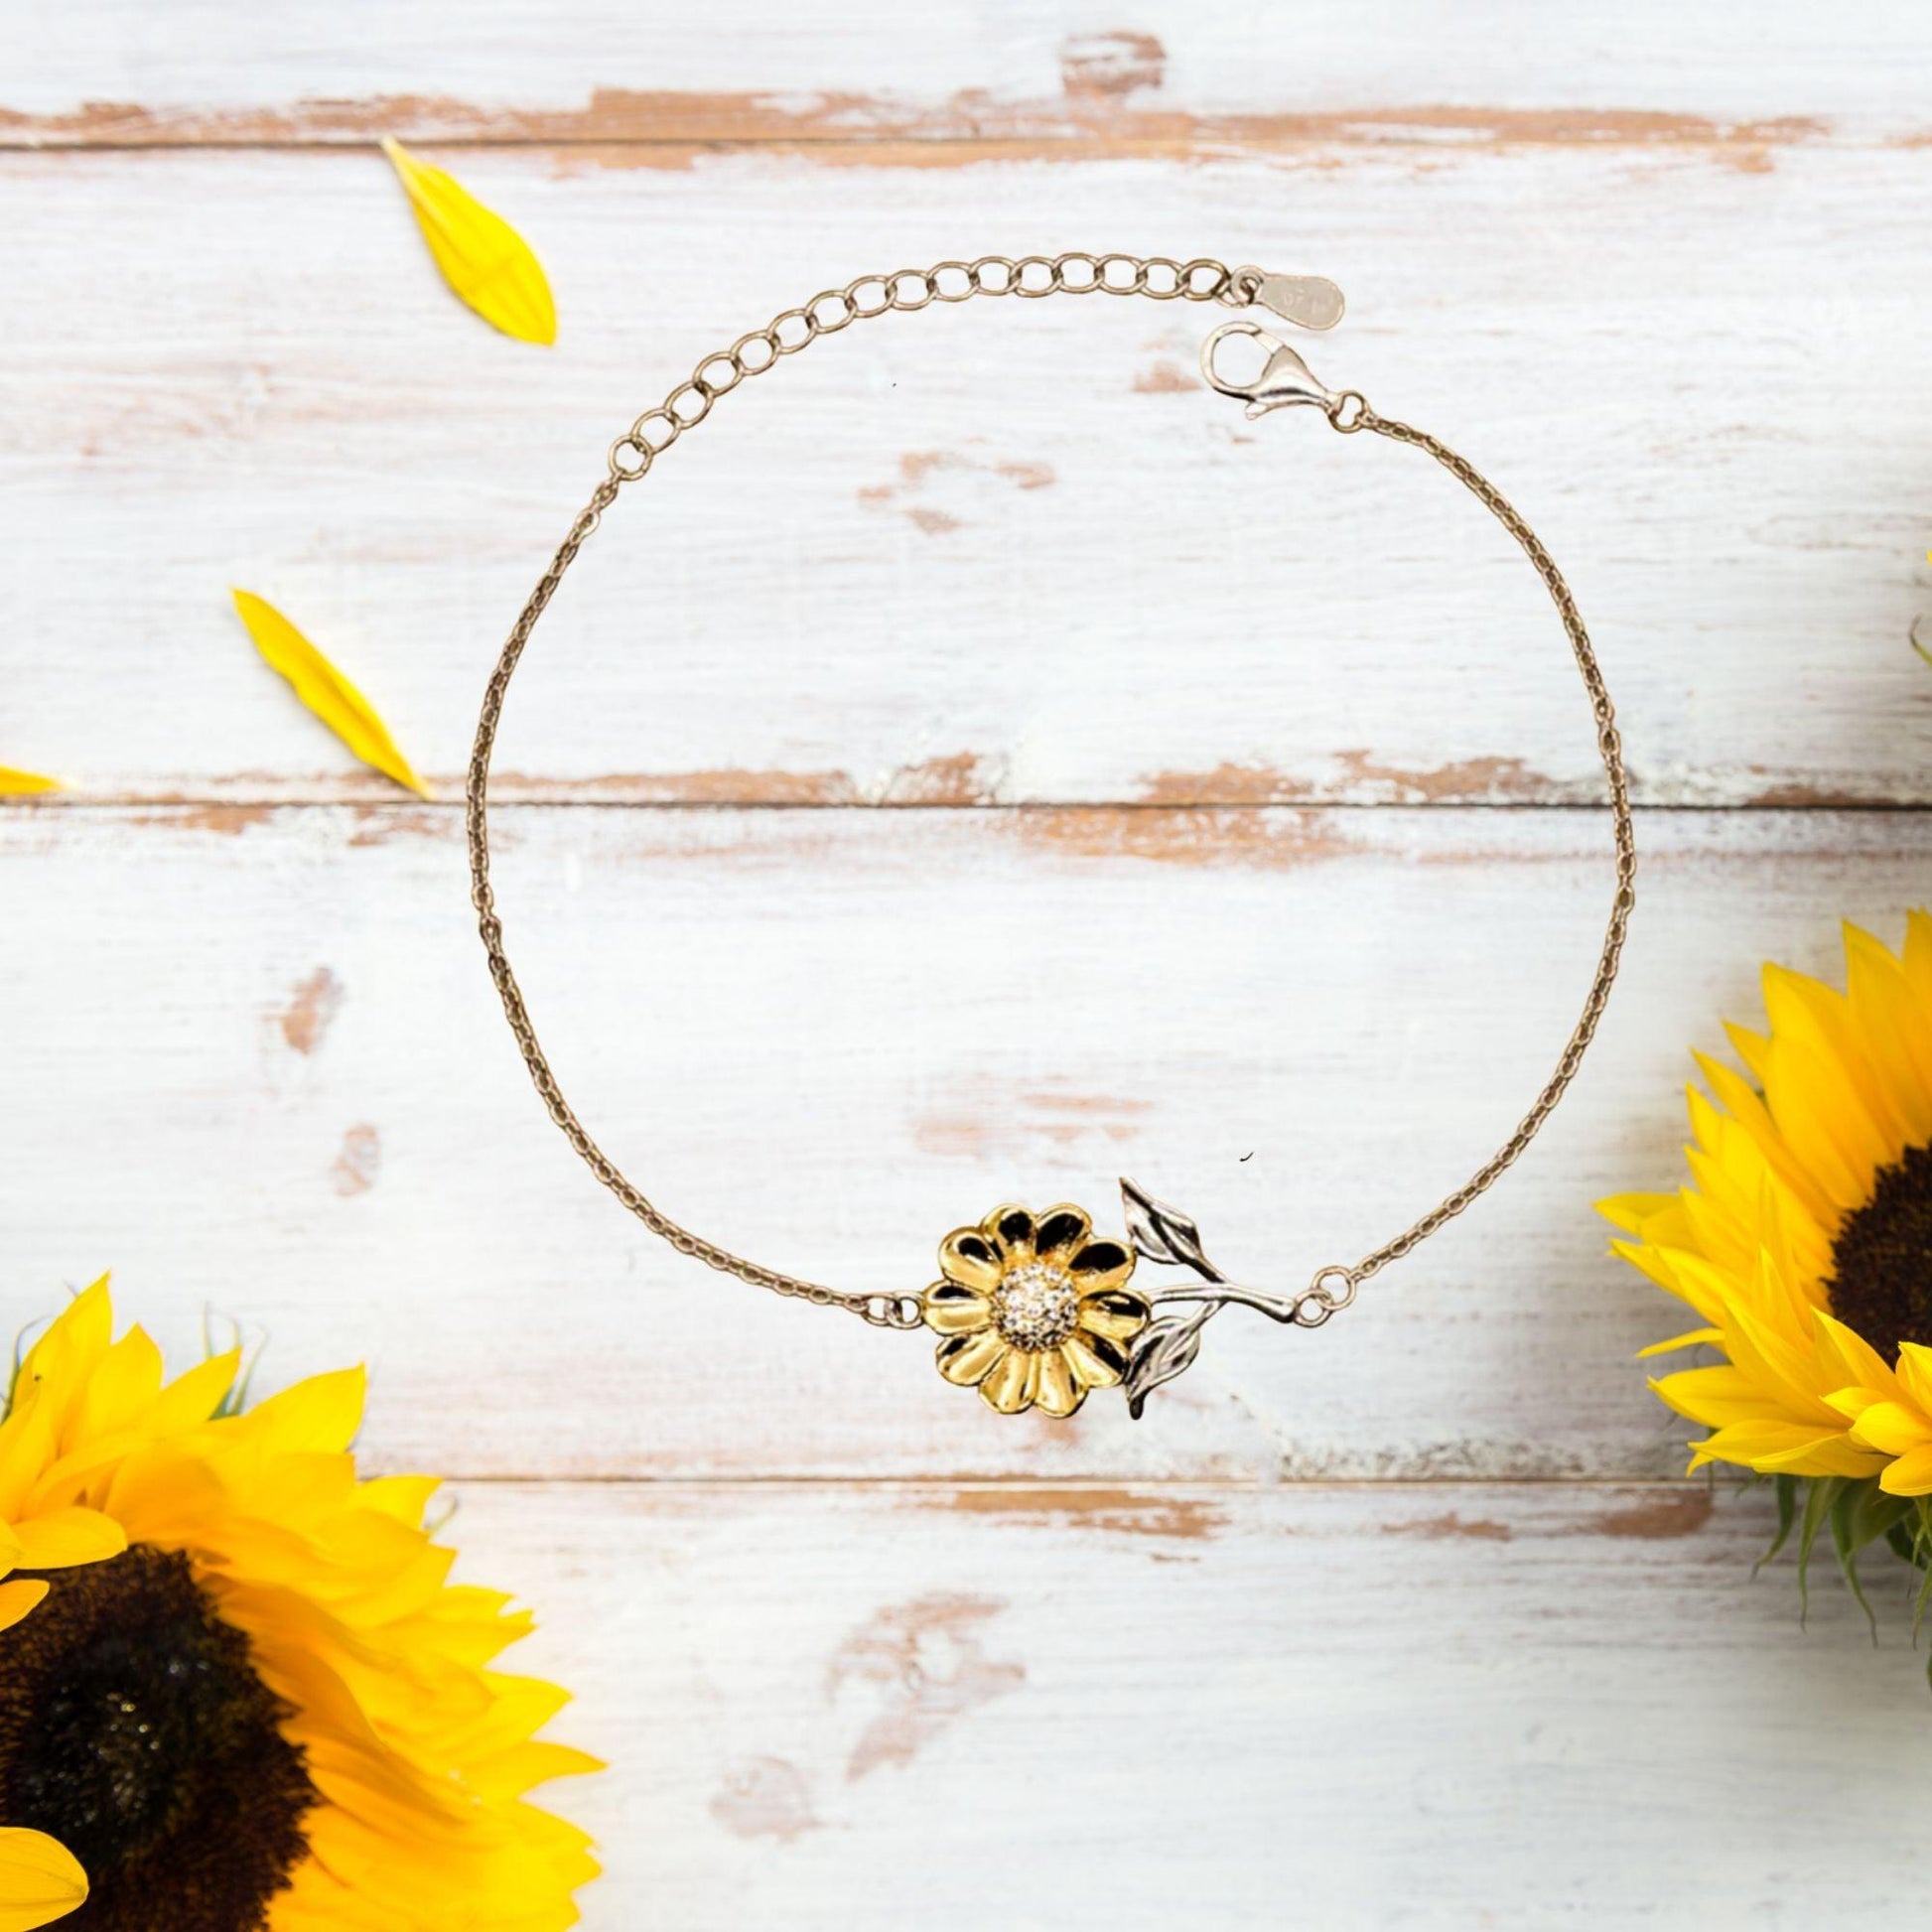 Remarkable Musician Gifts, Your dedication and hard work, Inspirational Birthday Christmas Unique Sunflower Bracelet For Musician, Coworkers, Men, Women, Friends - Mallard Moon Gift Shop